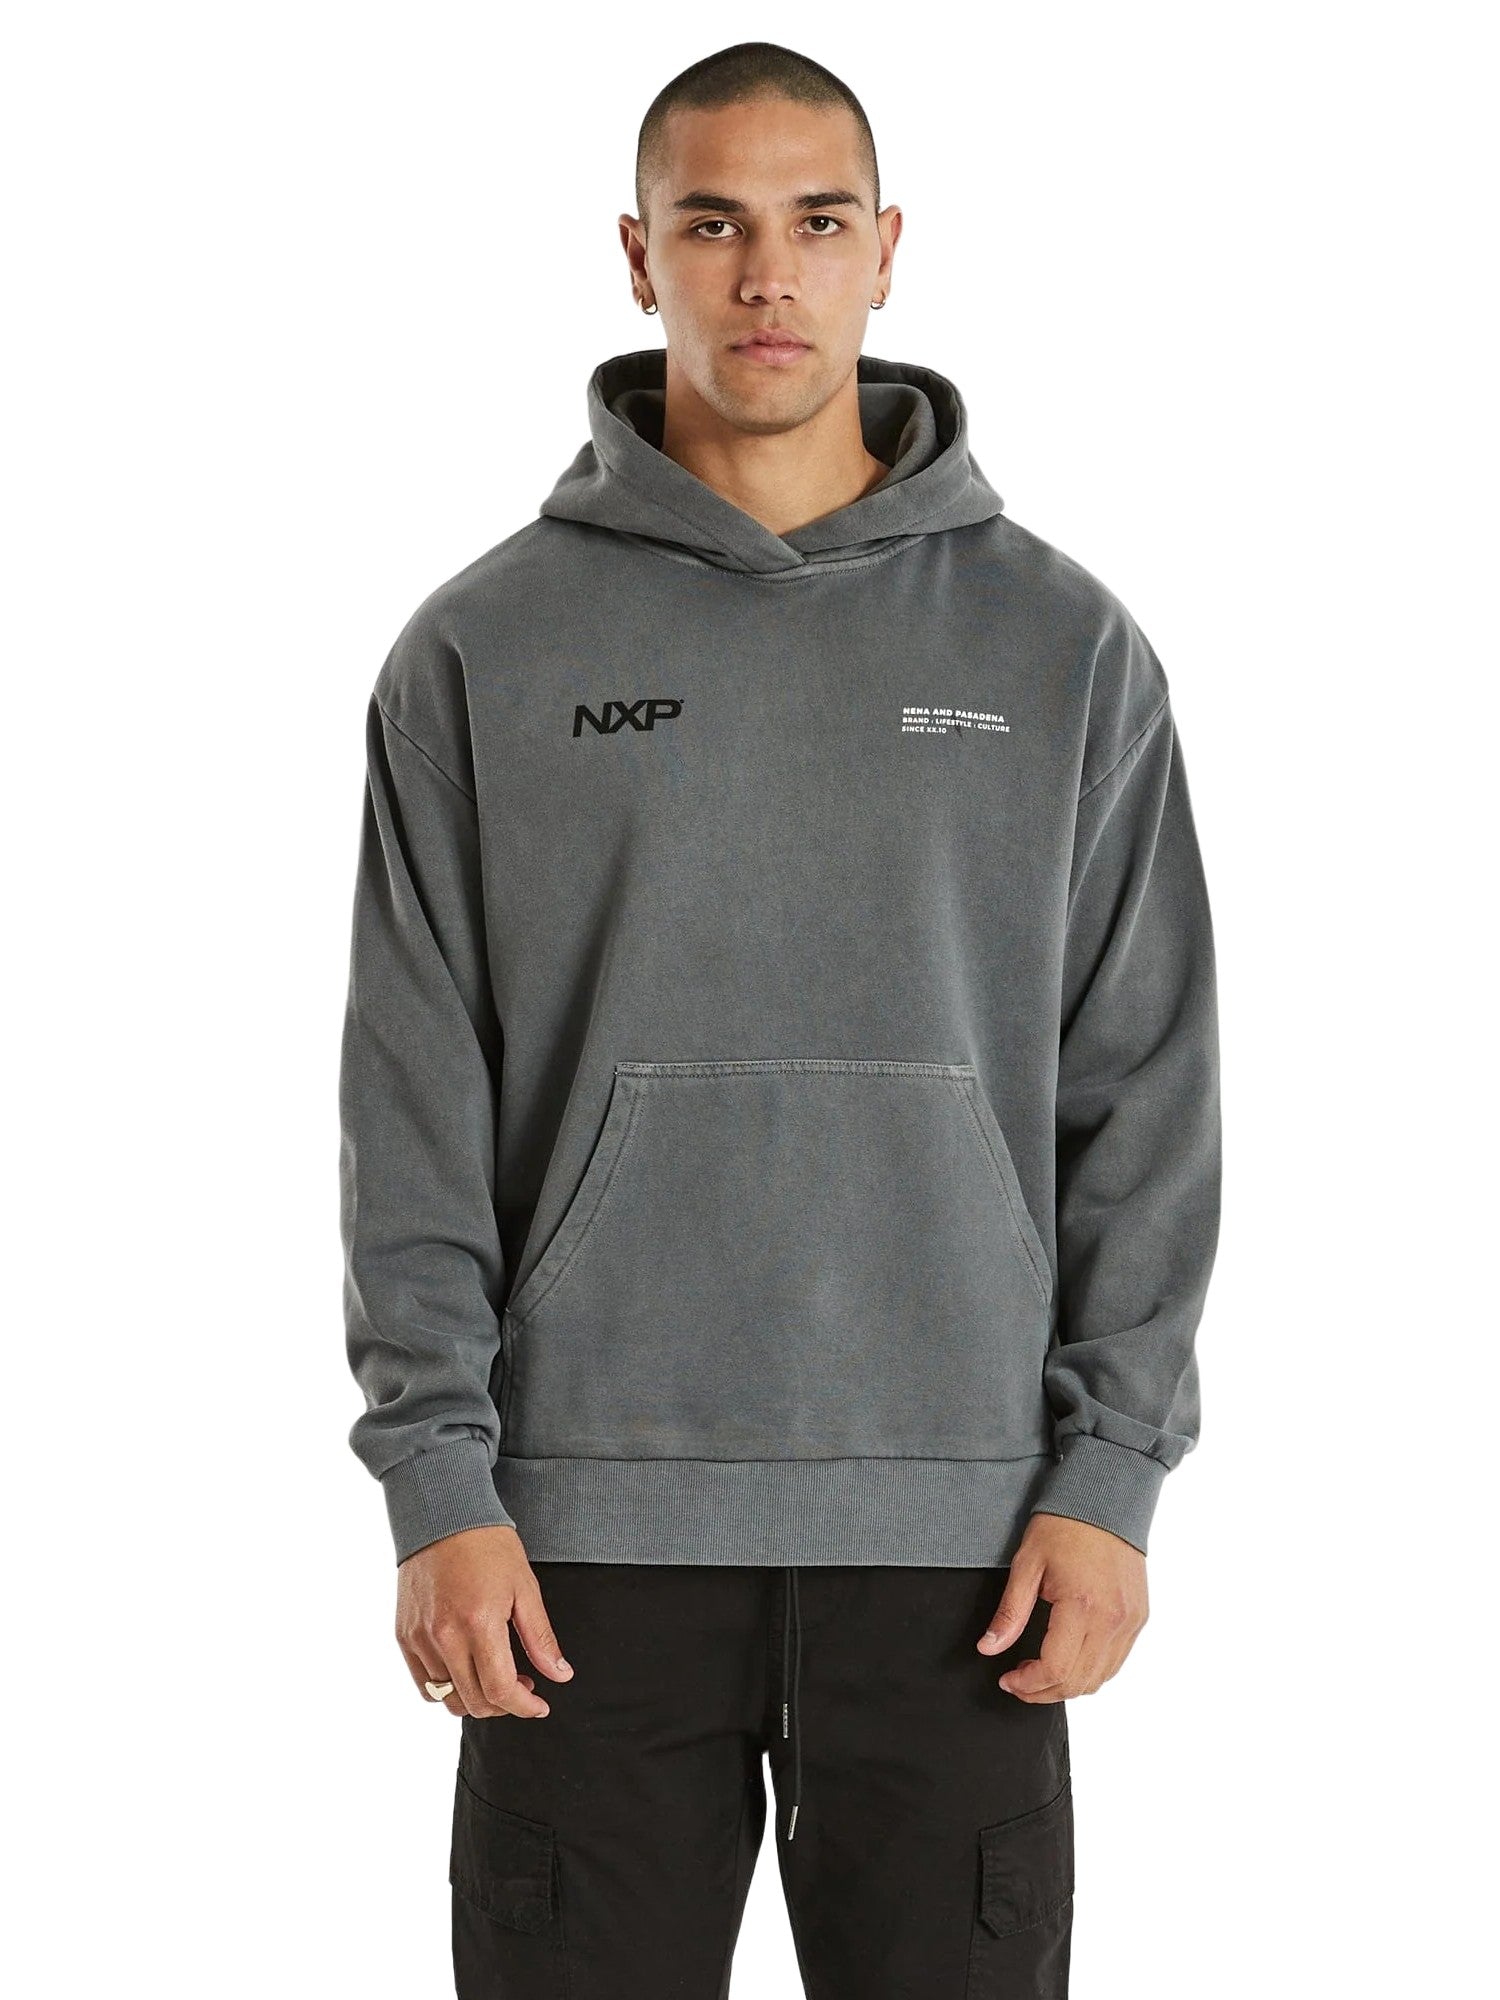 Nena And Pasadena - NXP Canyon Relaxed Hooded Sweater - Pigment Asphalt